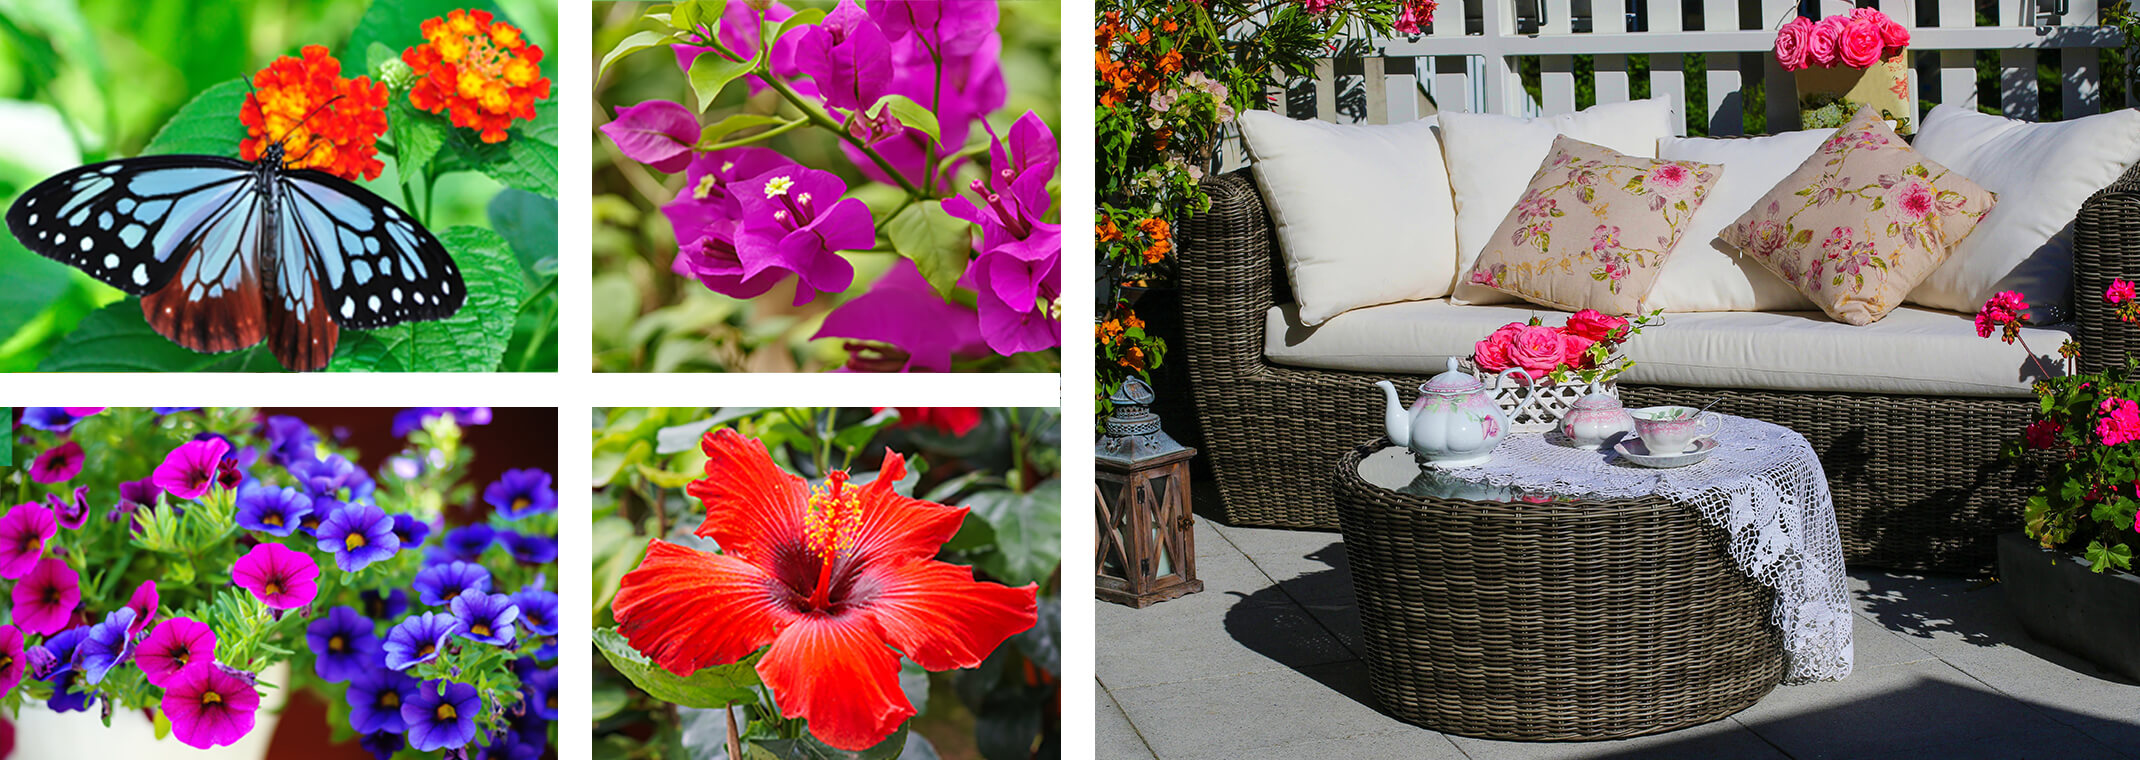 5 images: a butterfly on lantana flowers; petunias, bougainvillea, hibiscus, and a patio with bougainvillea, roses and geraniums next to seating, a tea set and a white fence